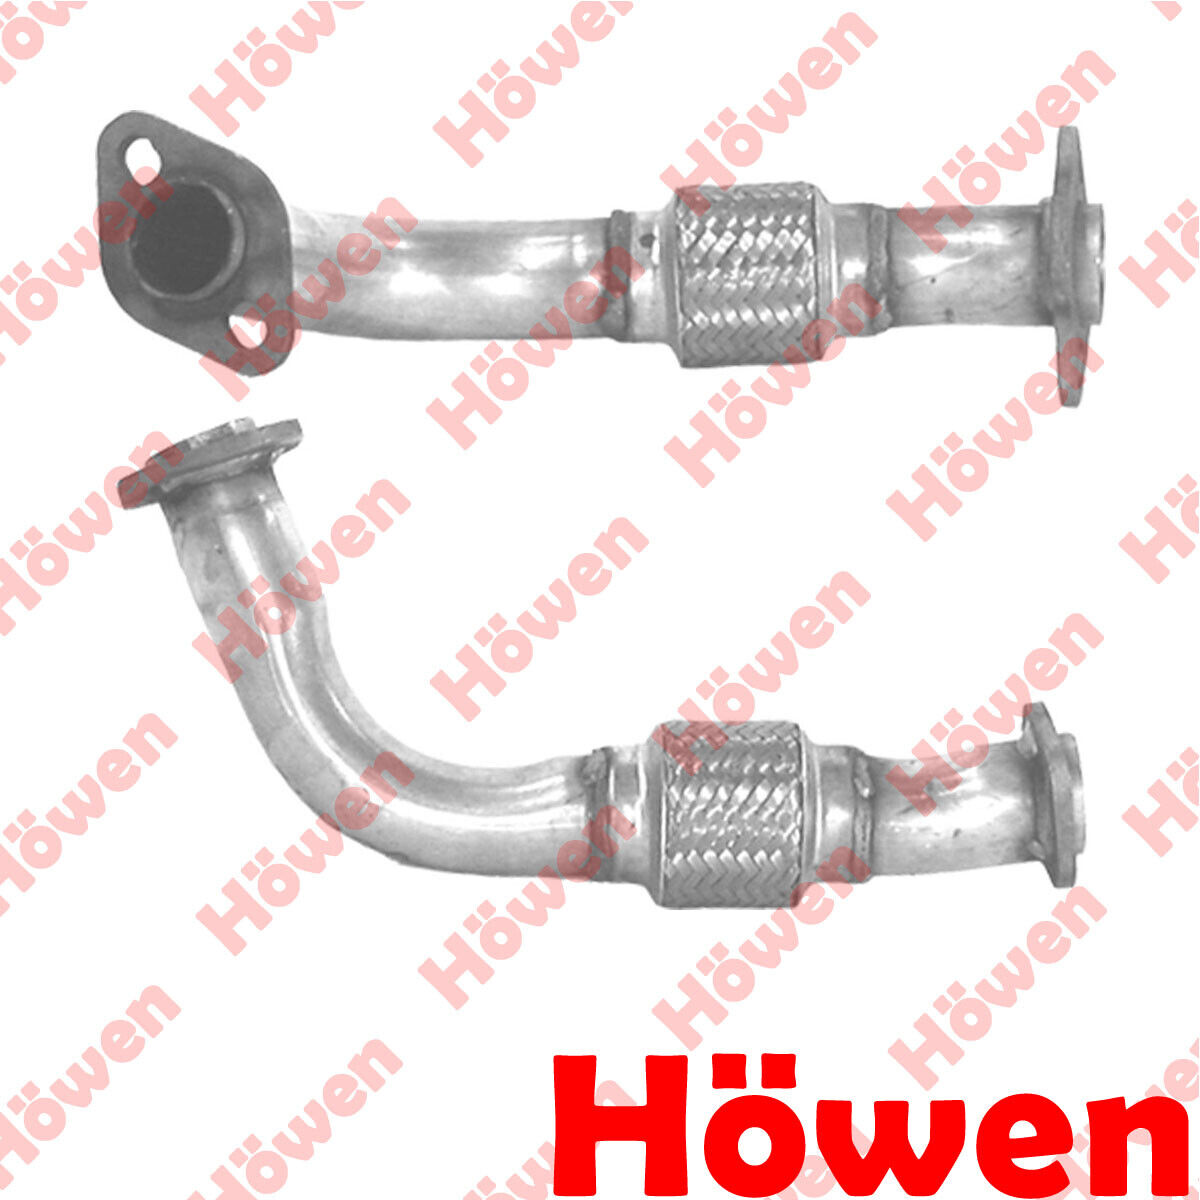 Fits Toyota Carina 1992-1997 1.6 1.8 Exhaust Pipe Euro 2 Front Howen 1741002170